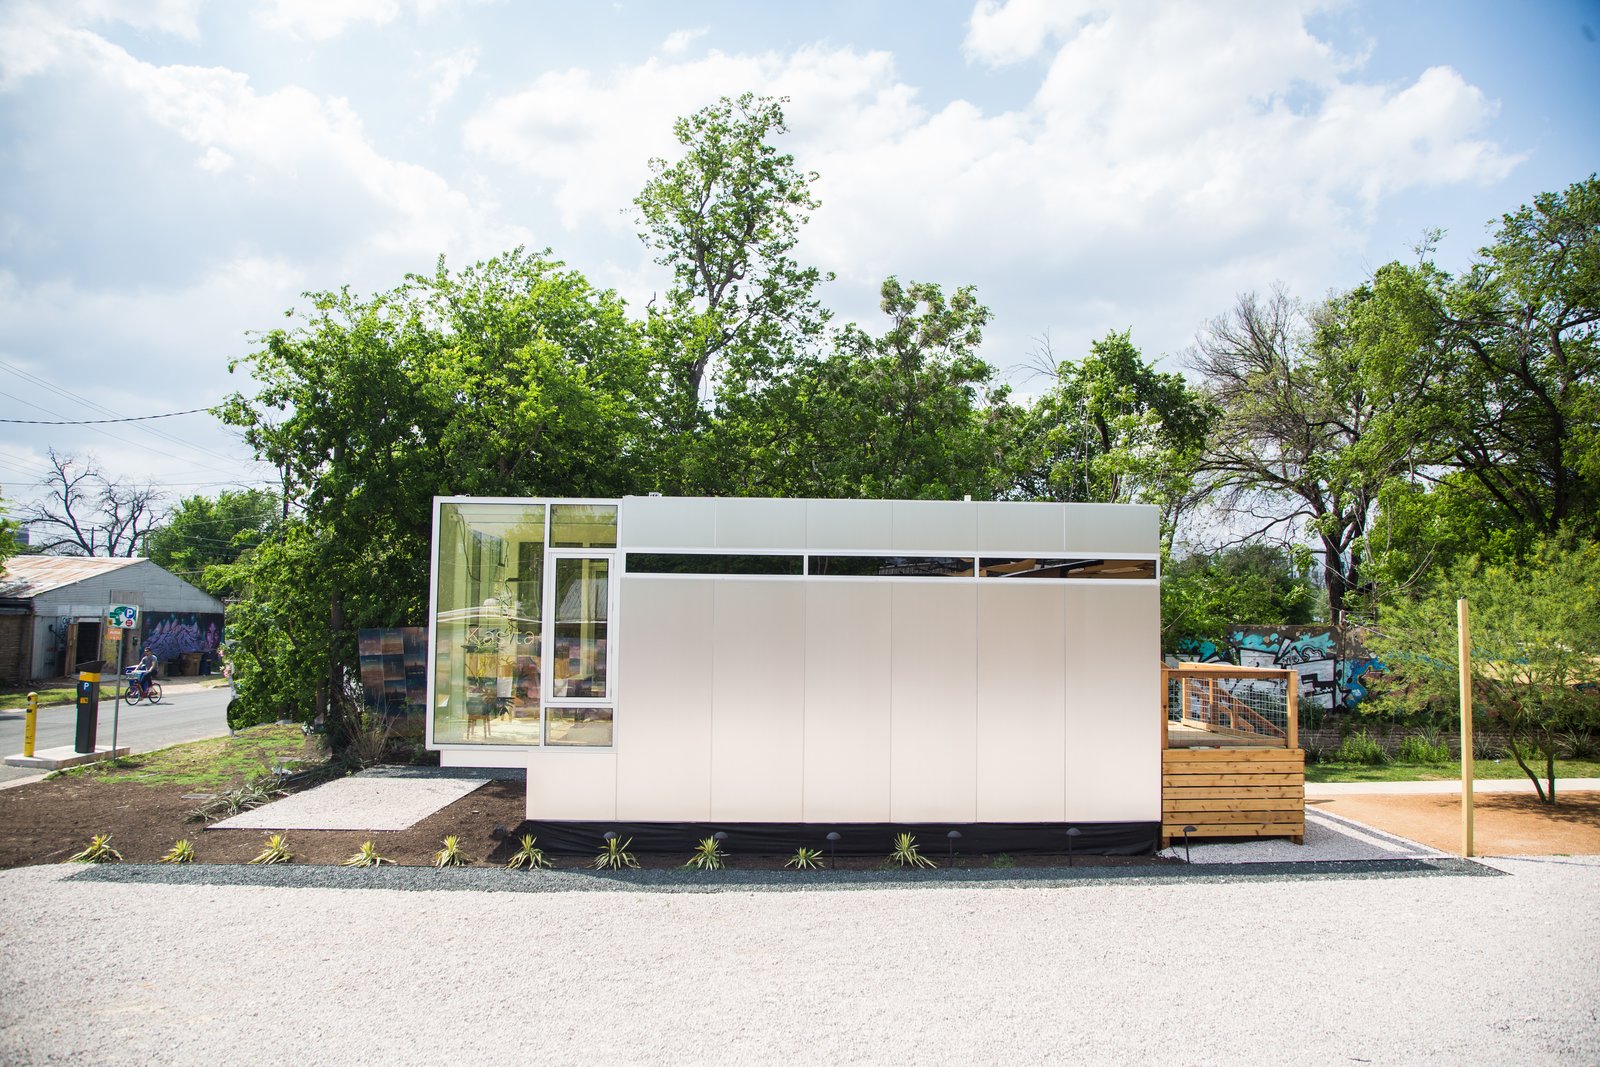 Can These Tiny, Modular Smart Homes Relieve the Demand For Affordable Housing?